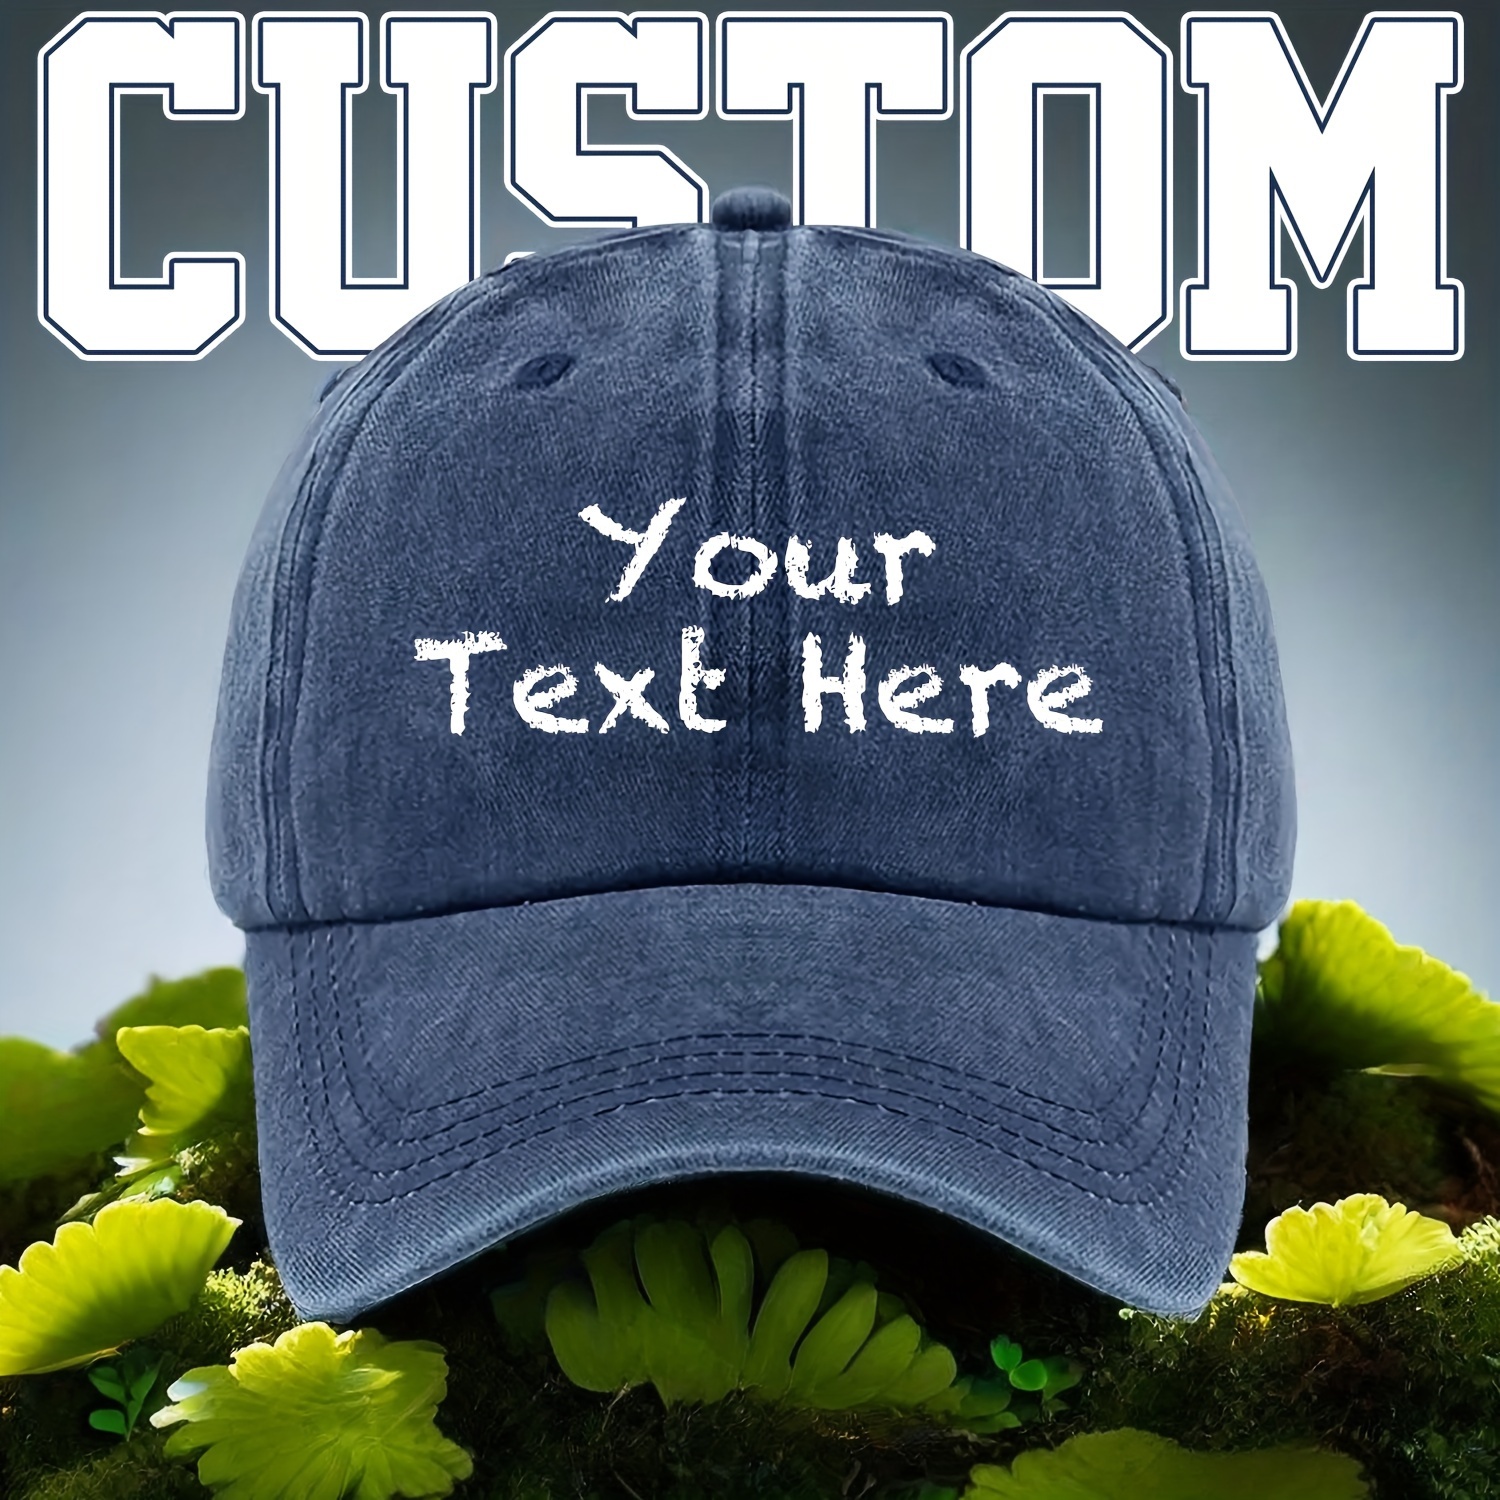 

Customizable Text Washed Fabric Baseball Cap, Unisex Adjustable Head Circumference Cotton Peaked Hat, Summer Casual Sunshade Cap